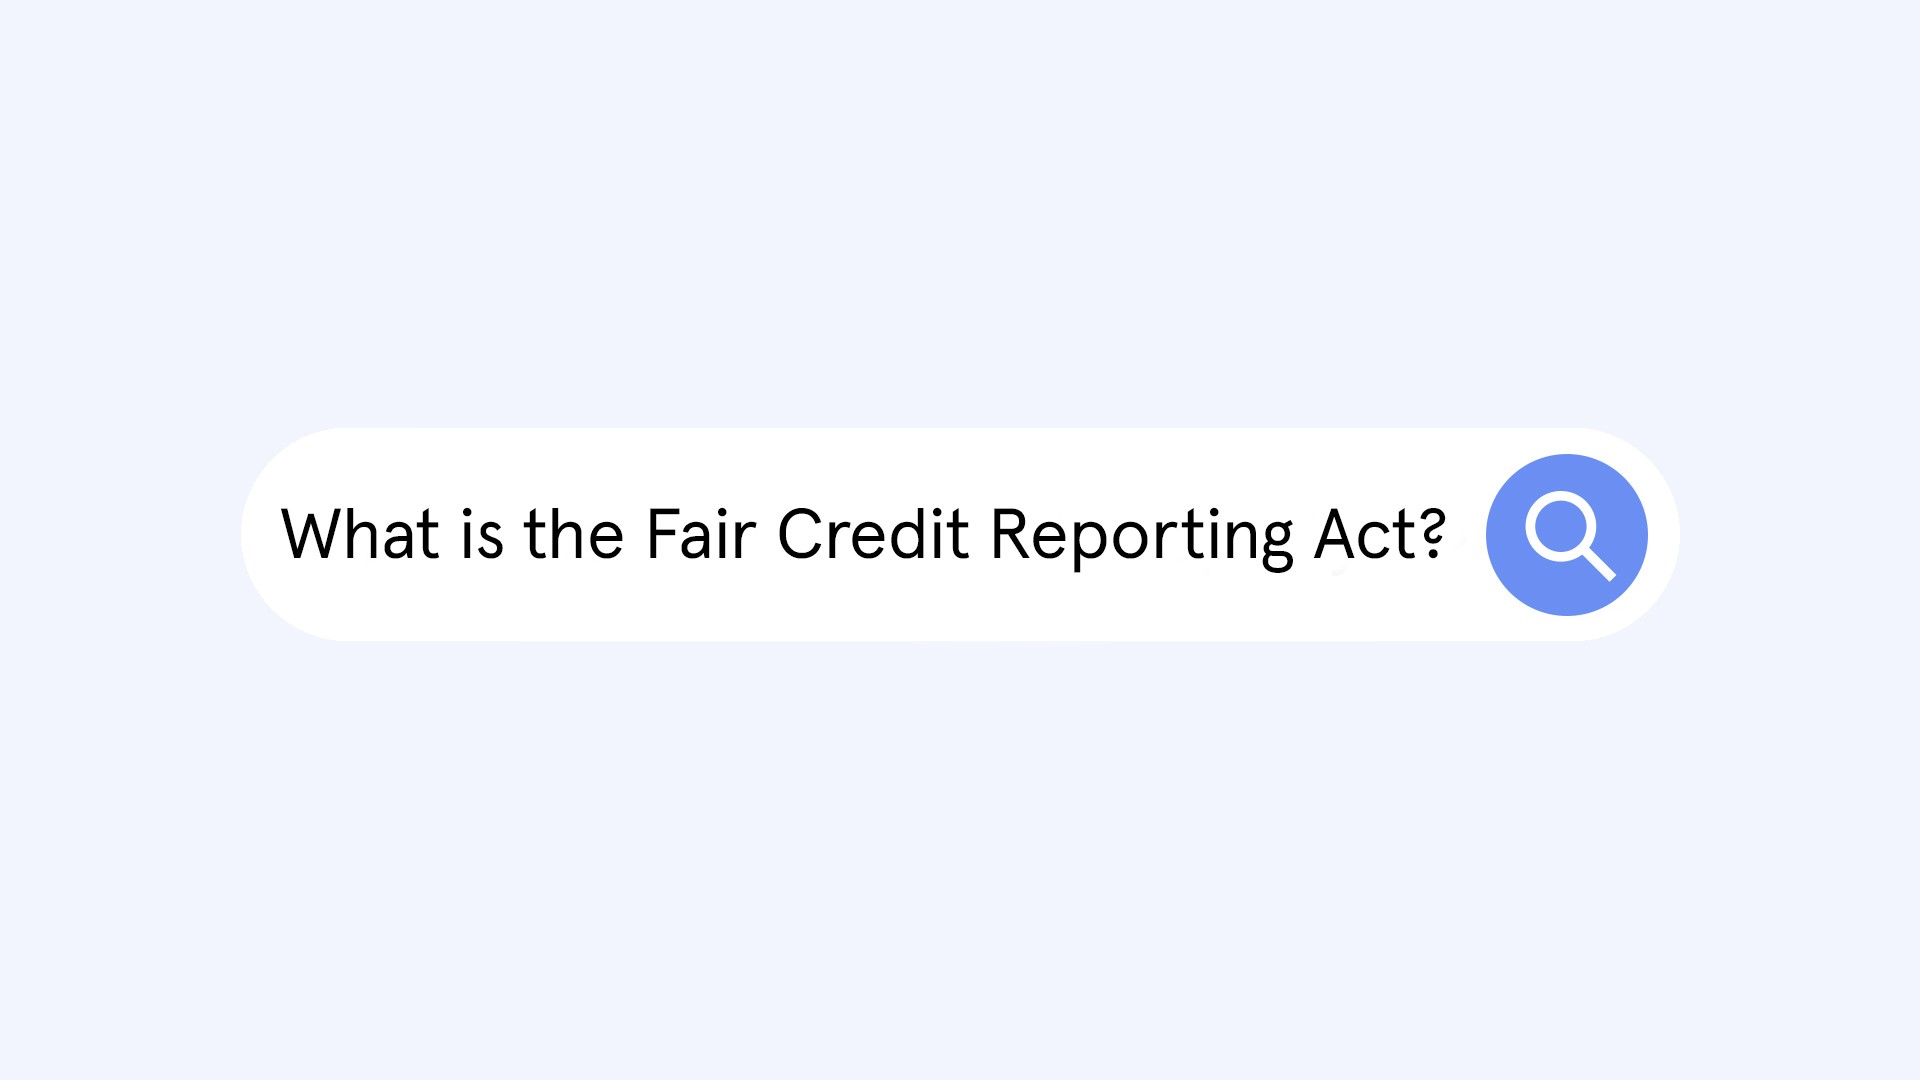 What Is the Fair Credit Reporting Act (FCRA)?